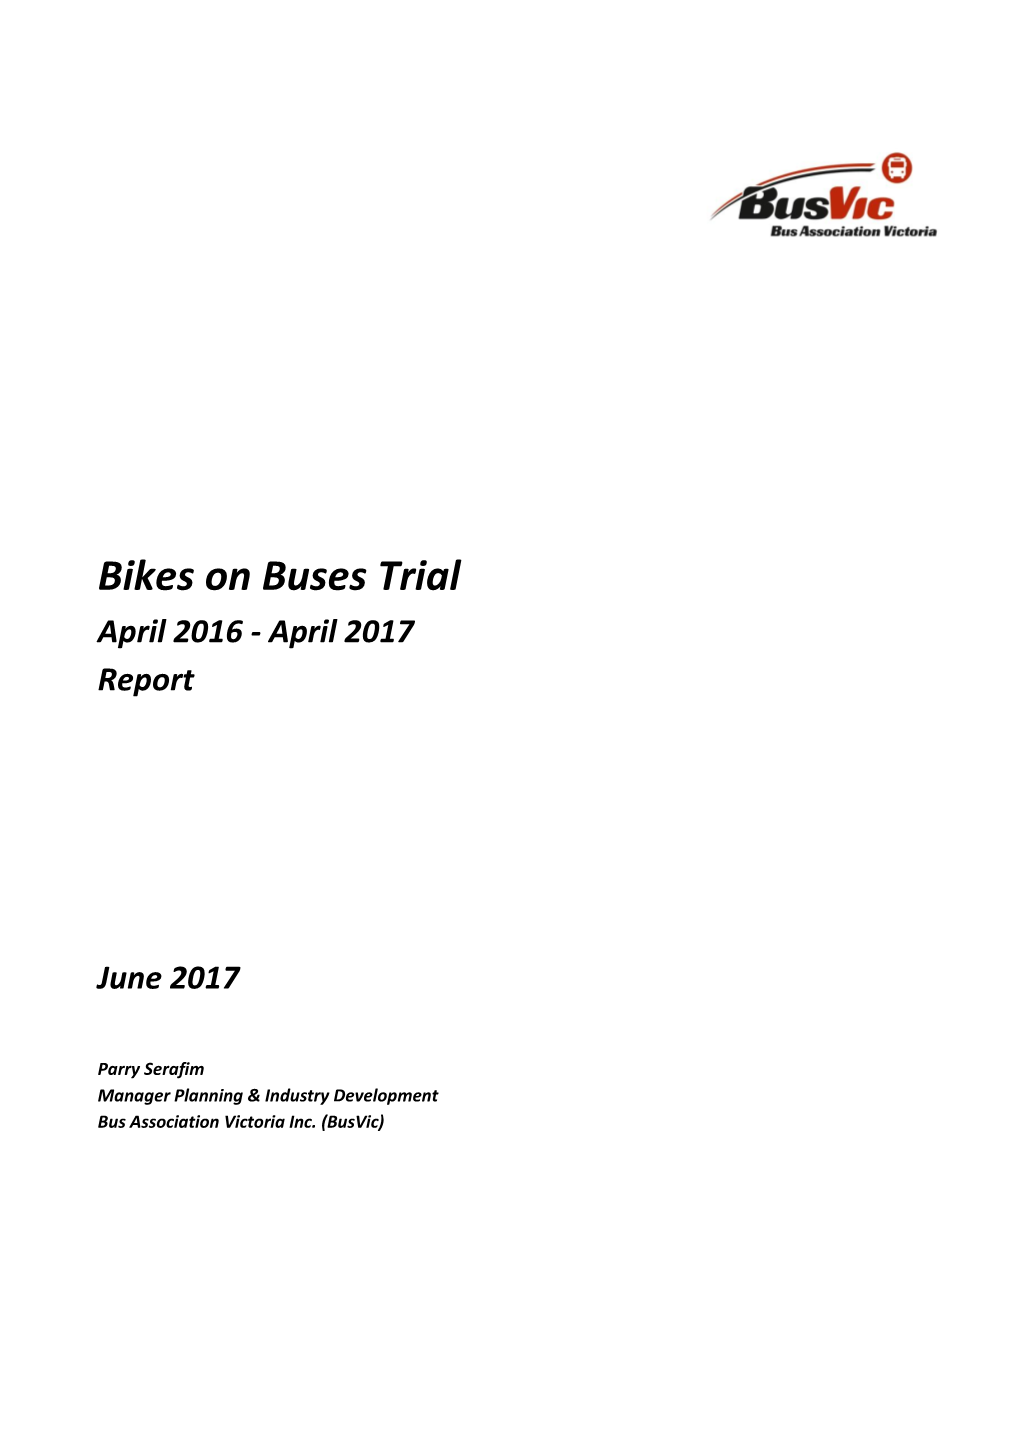 Bikes on Buses Trial Report